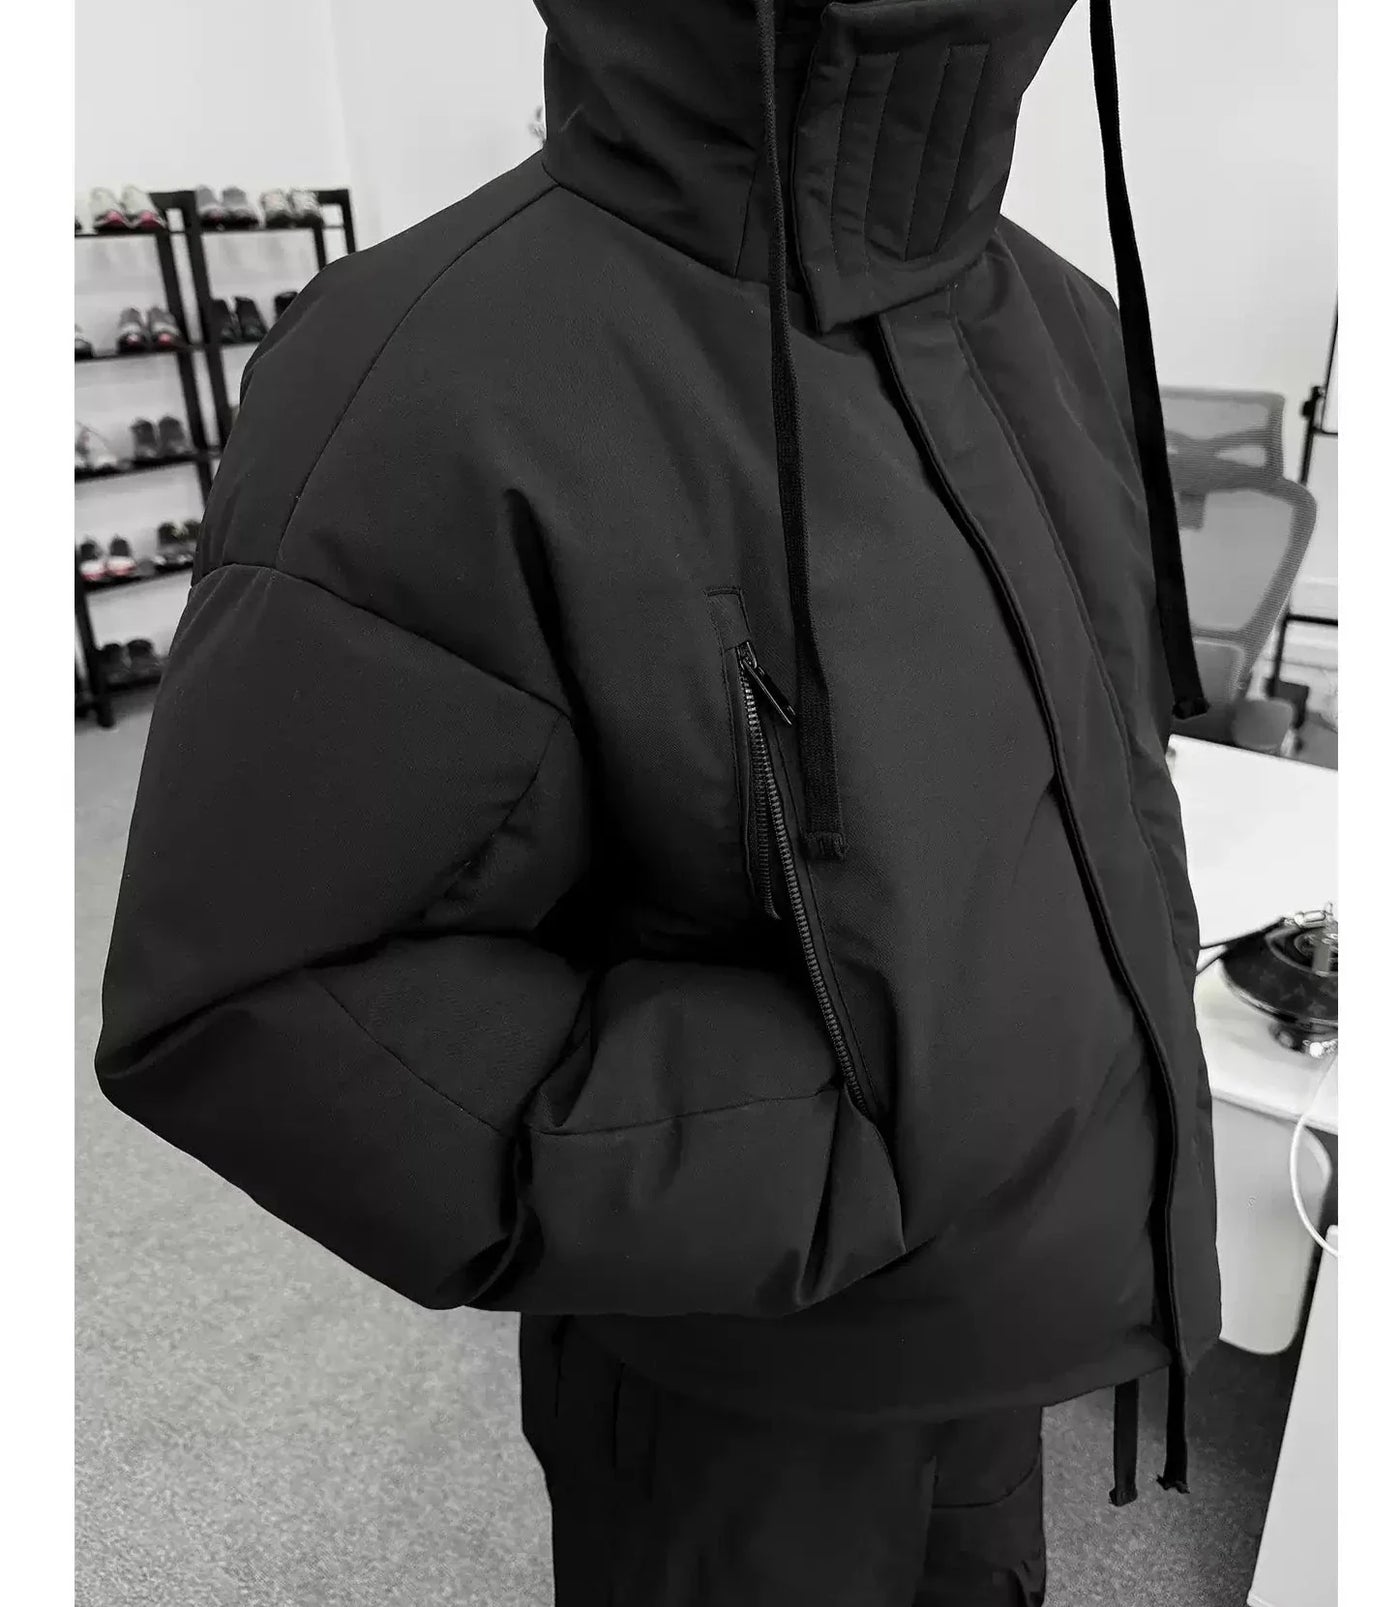 Multi-Zip and Strings Puffer Jacket Korean Street Fashion Jacket By Terra Incognita Shop Online at OH Vault